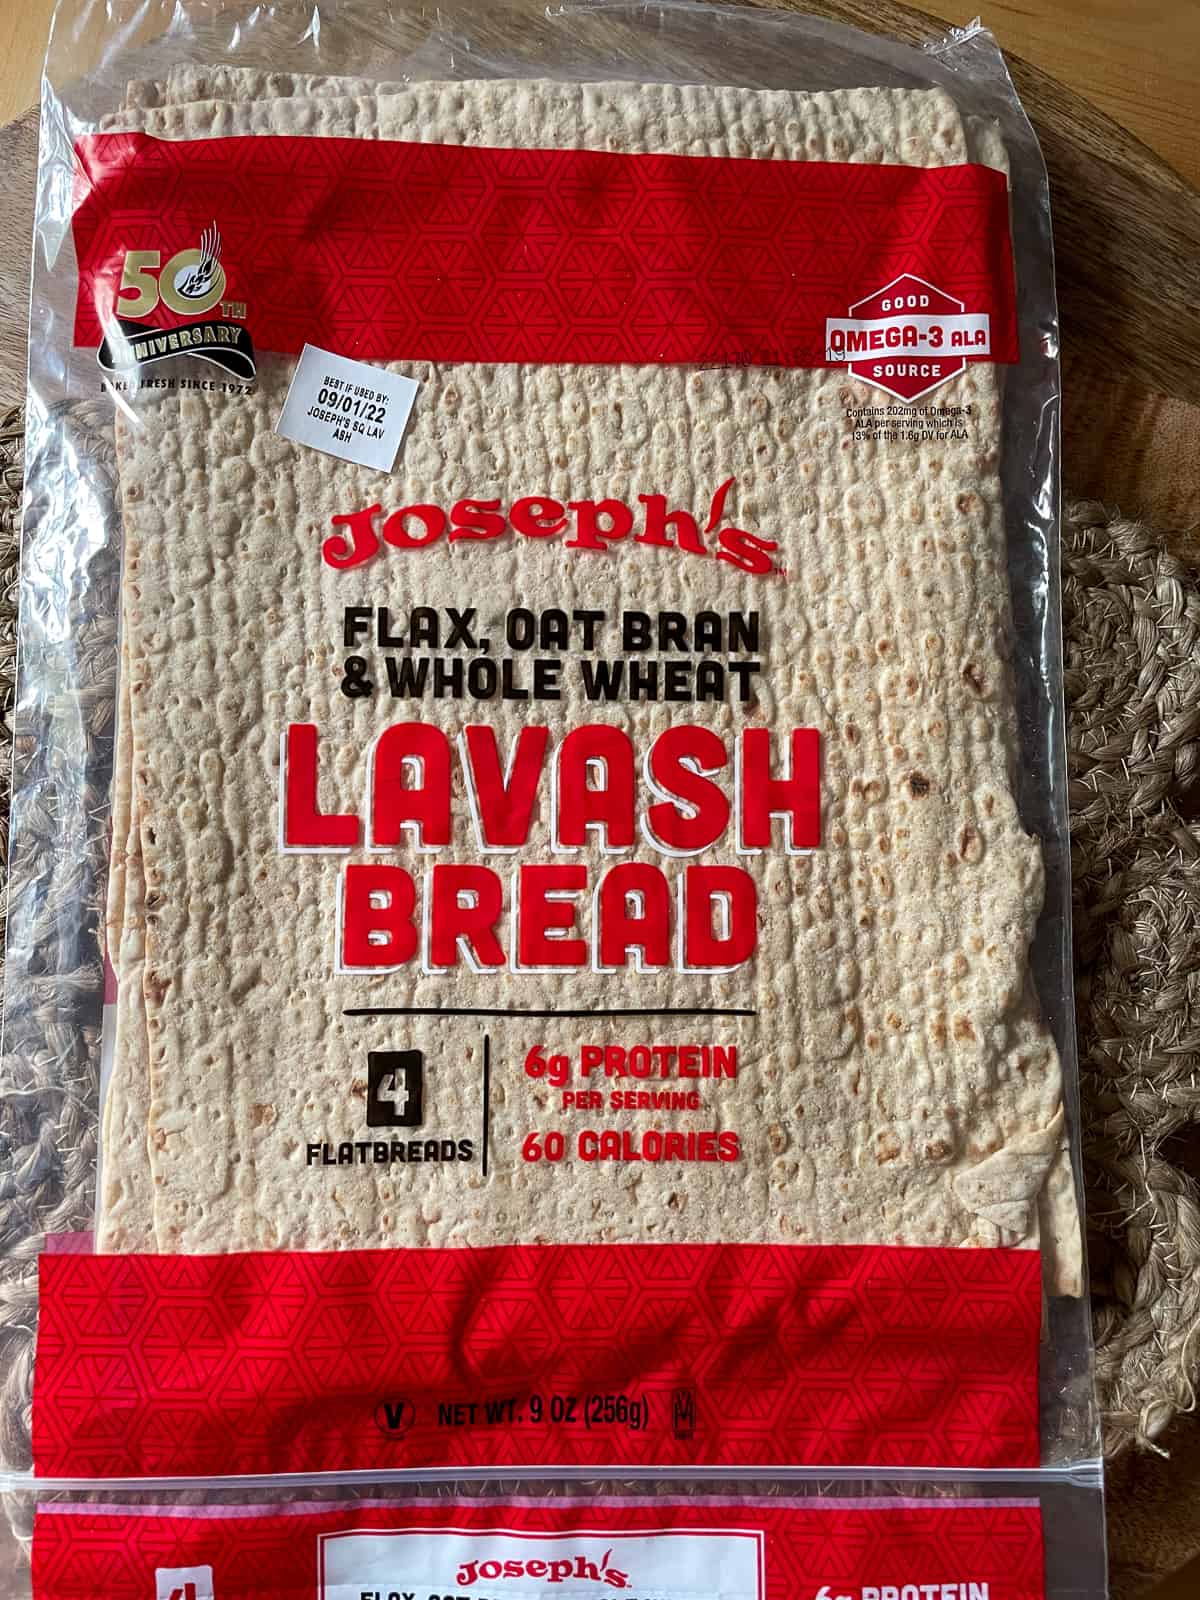 Package of Lavash Bread